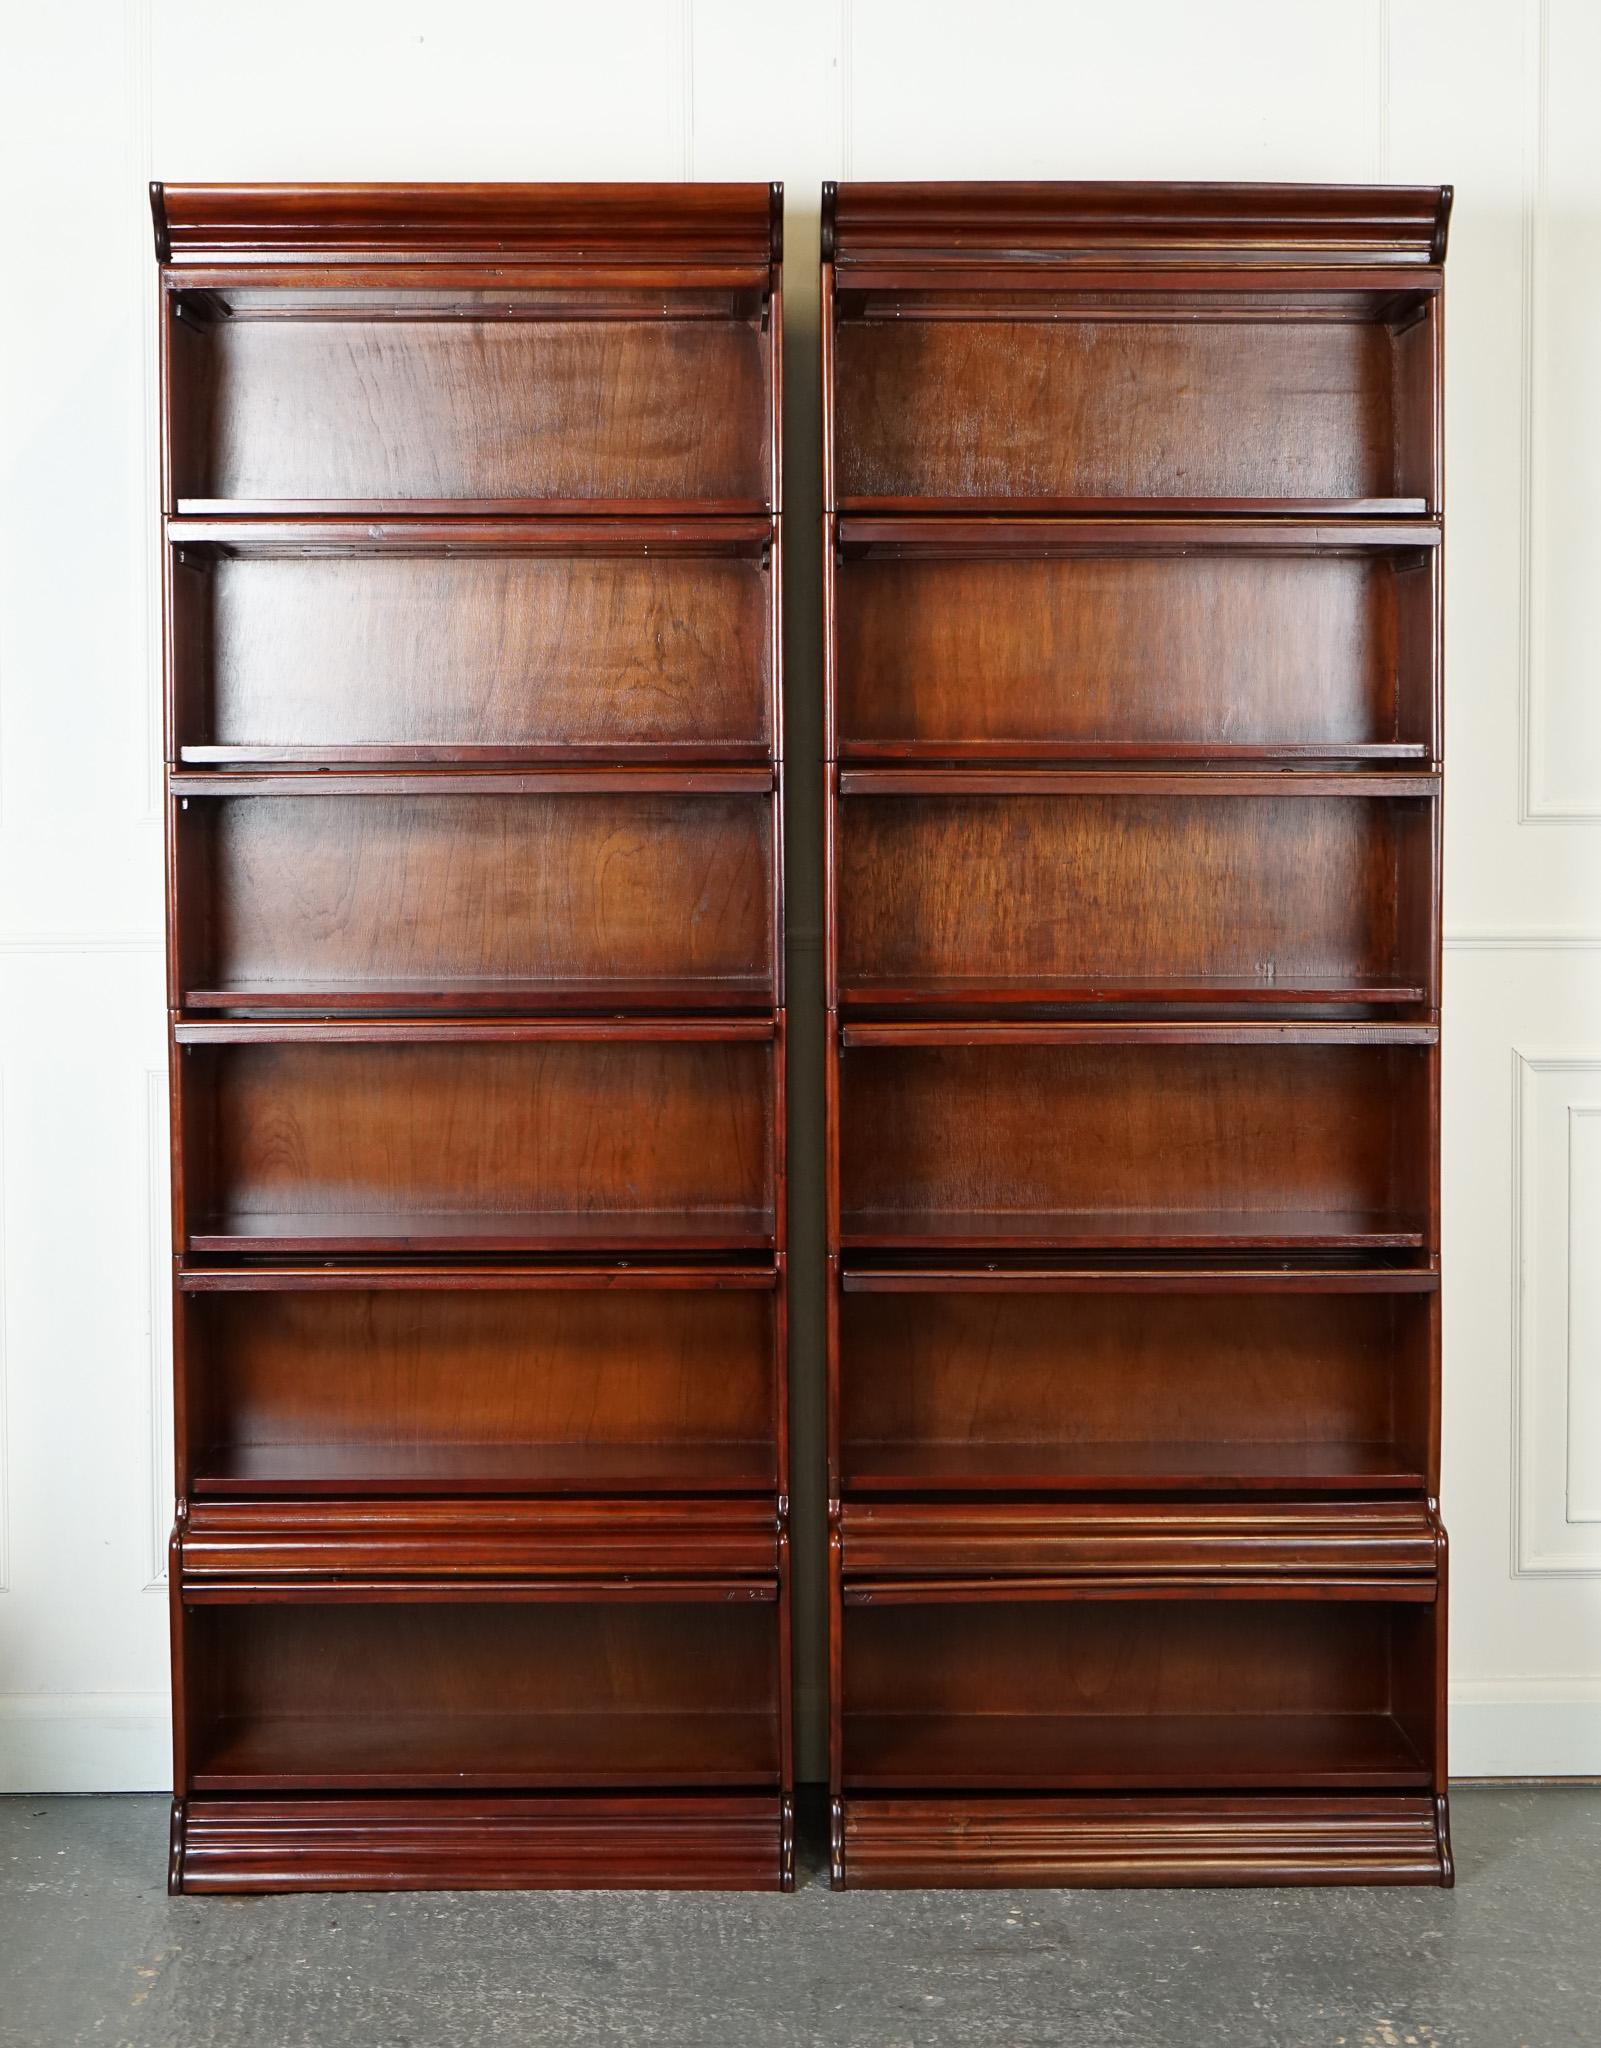 Antiques of London

We are delighted to offer for sale this Vintage Pair Of Globe Wernicke Style Bookcases.

This vintage pair of Globe Wernicke-style barrister bookcases consists of six sections each. 

The bookcases feature a sleek and timeless